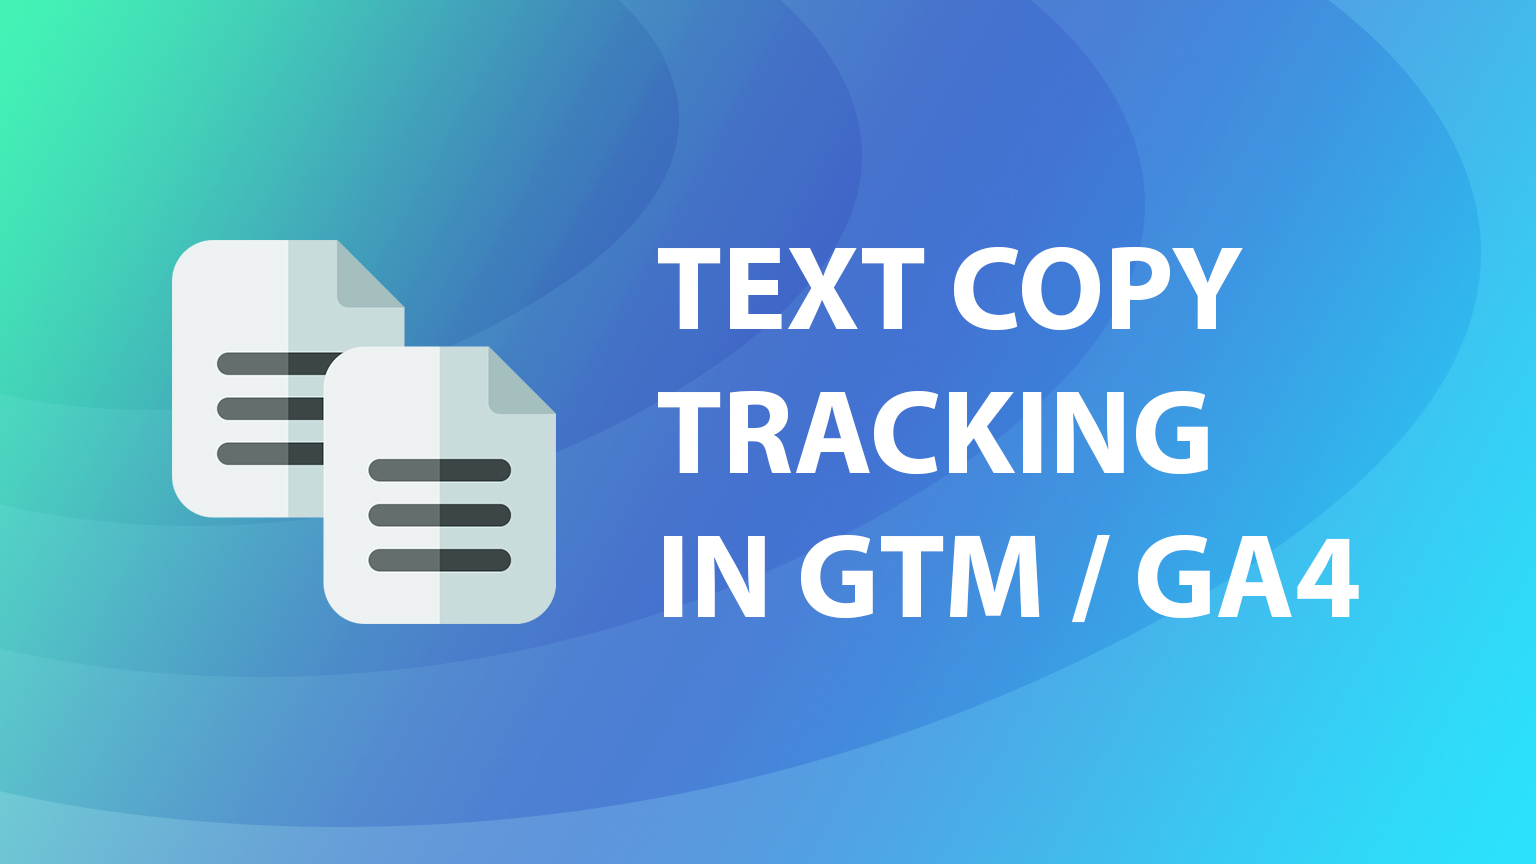 Tracking when text is copied in GTM and GA4